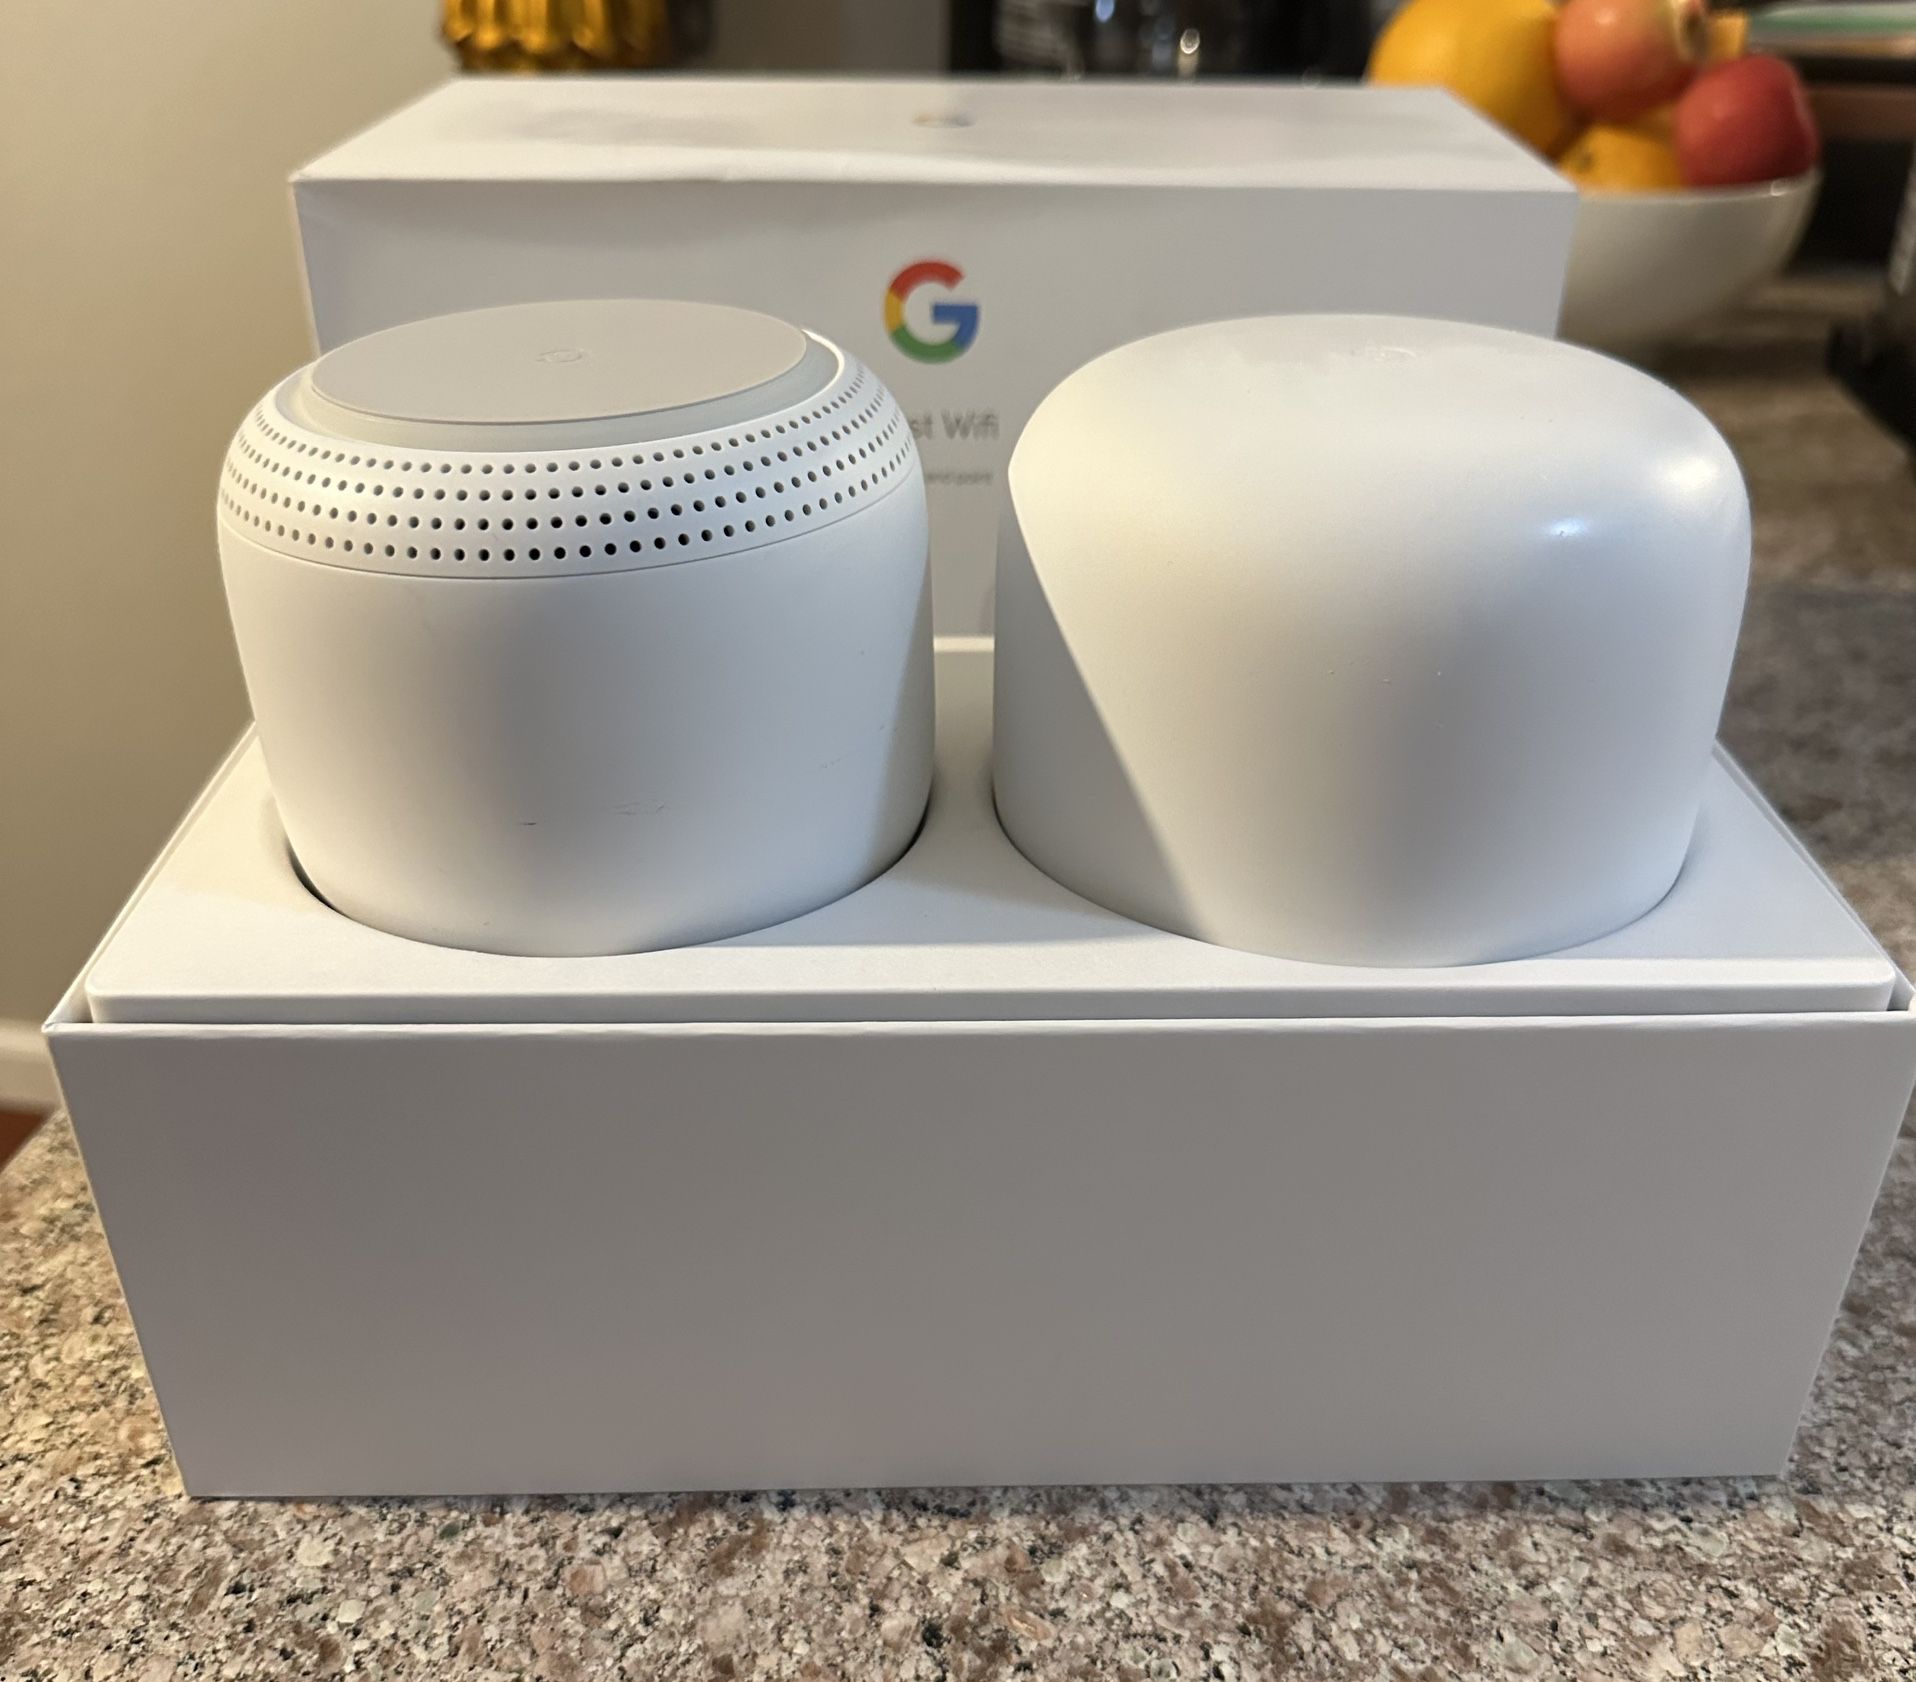 Google Nest WIFI Router and Point